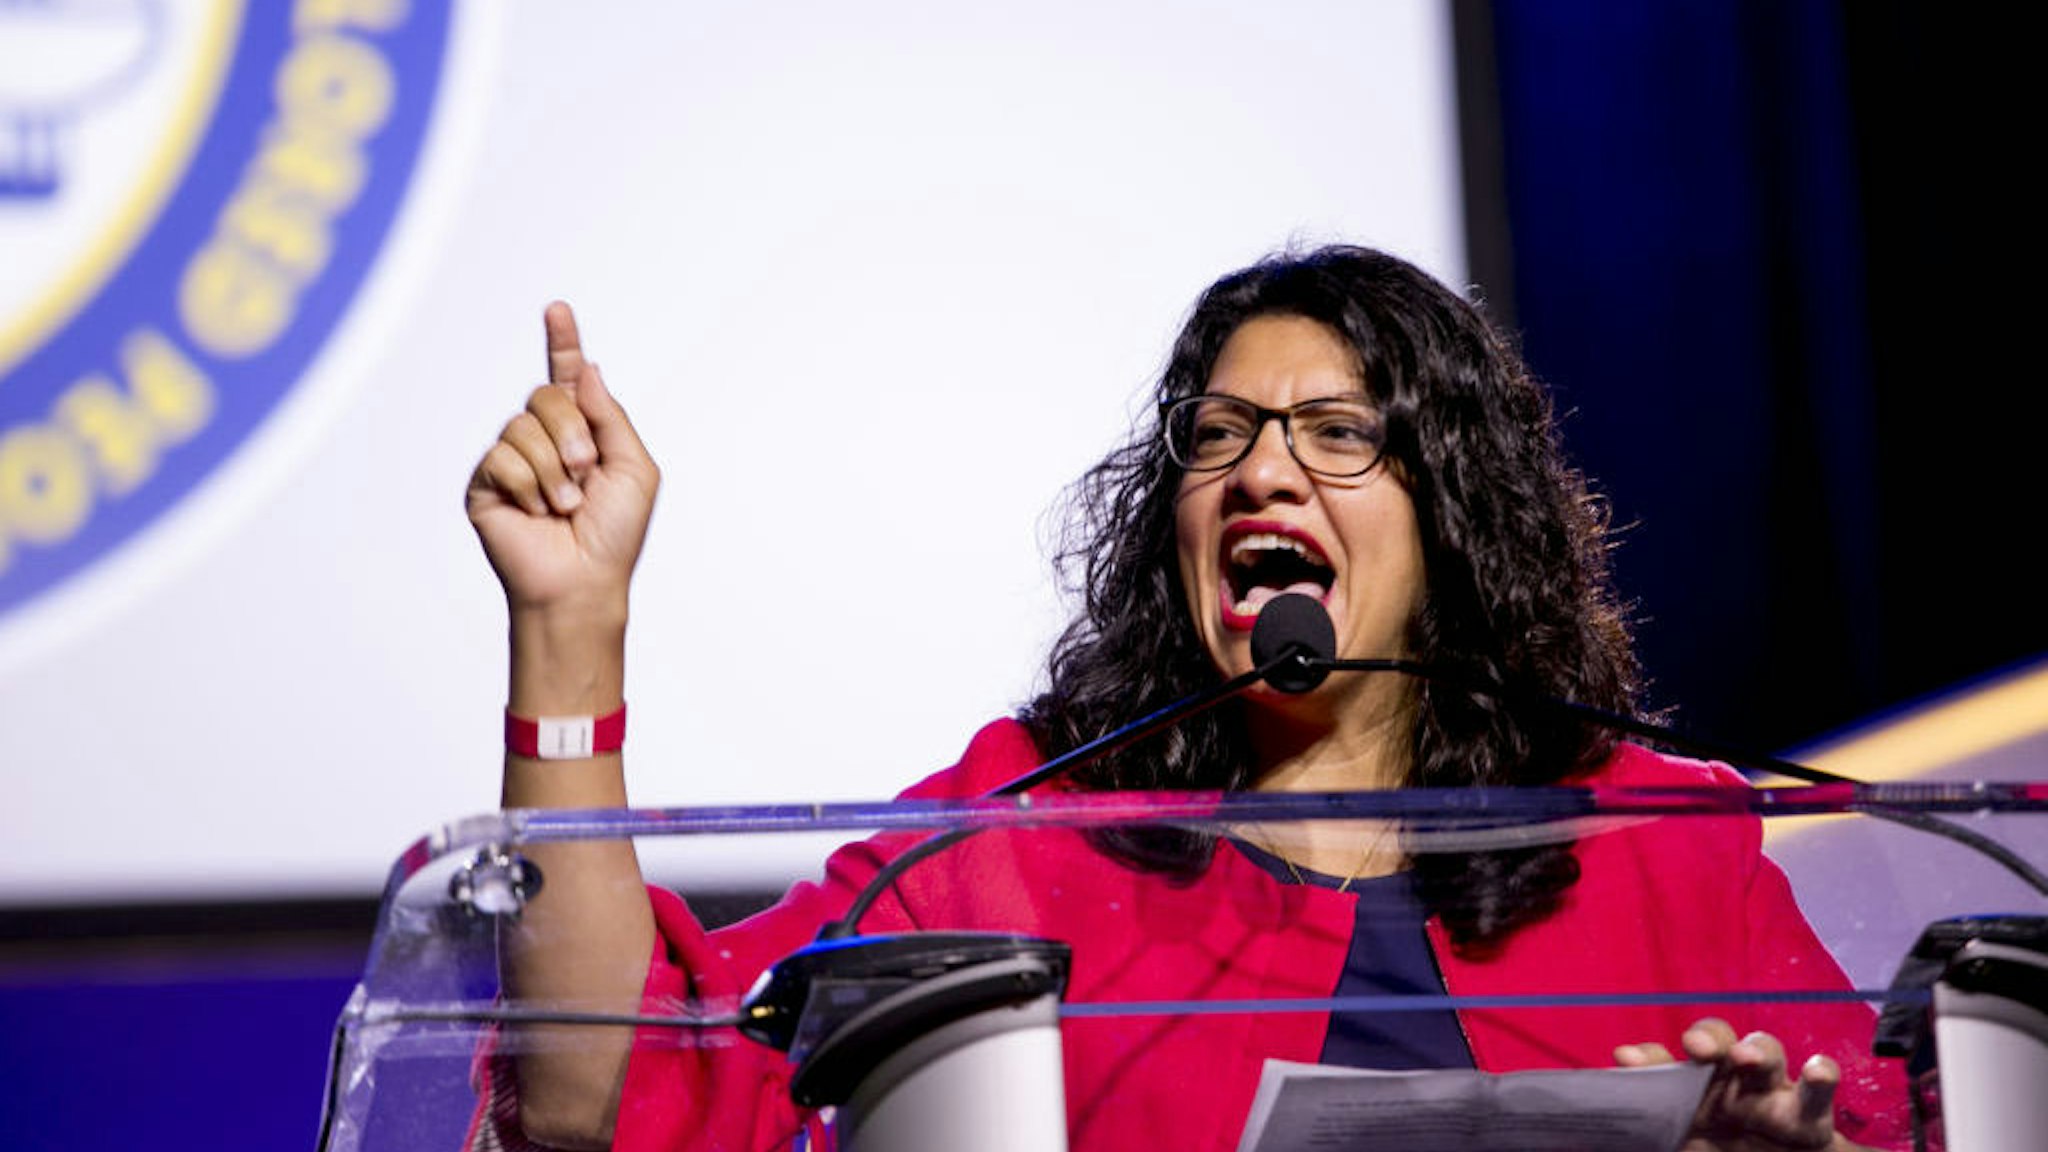 Representative Rashida Tlaib, a Democrat from Michigan, speaks during the 110th NAACP Annual Convention in Detroit, Michigan, U.S., on Monday, July 22, 2019. Democrats are launching a campaign in seven battleground states to make the case against Donald Trump's economy, seeking to neutralize the president's strongest political asset as his re-election campaign heats up. Photographer: Anthony Lanzilote/Bloomberg